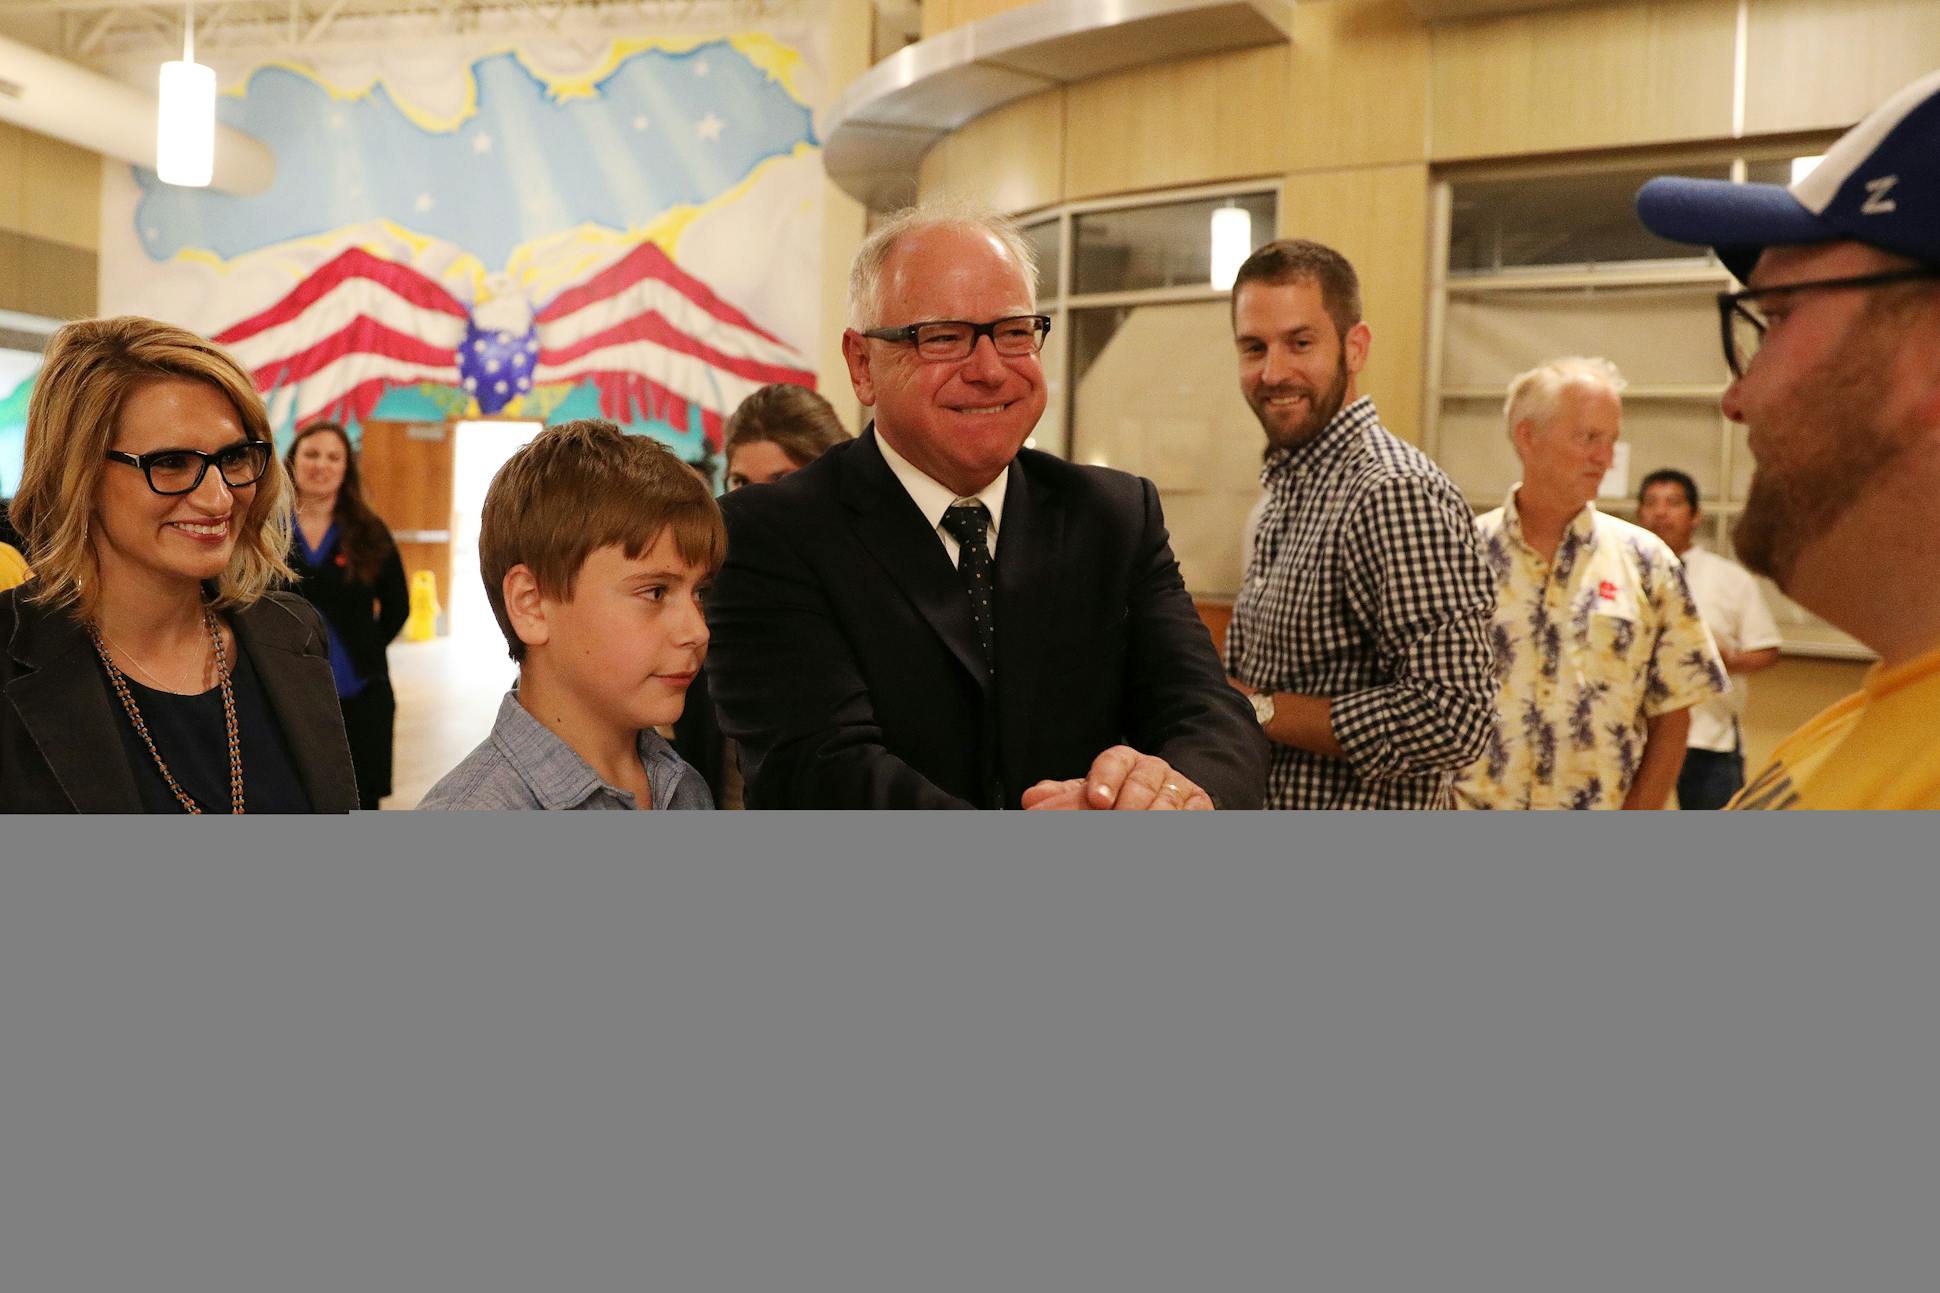 Walz, his son Gus, and his running mate Peggy Flanagan came out to greet supporters during their night party at the Carpenters Union Hall.